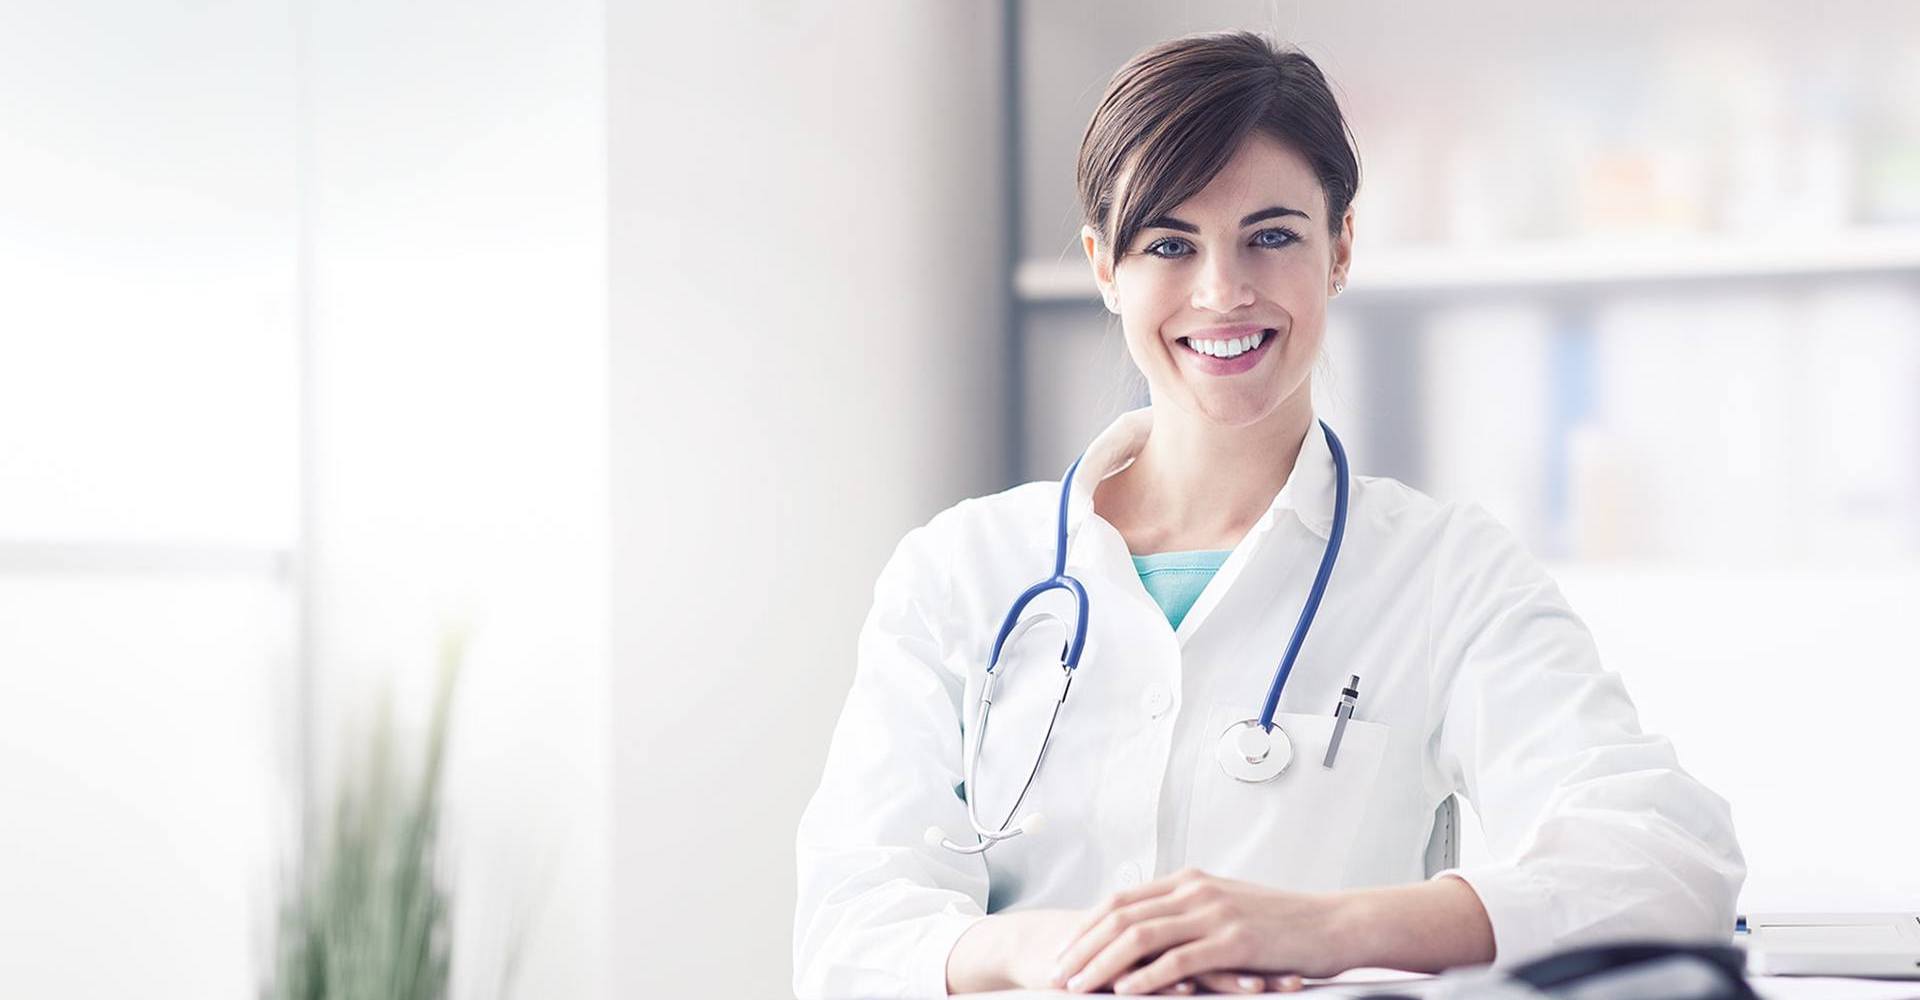 Female healthcare professional with a stethoscope smiling at the camera in a clinical setting.